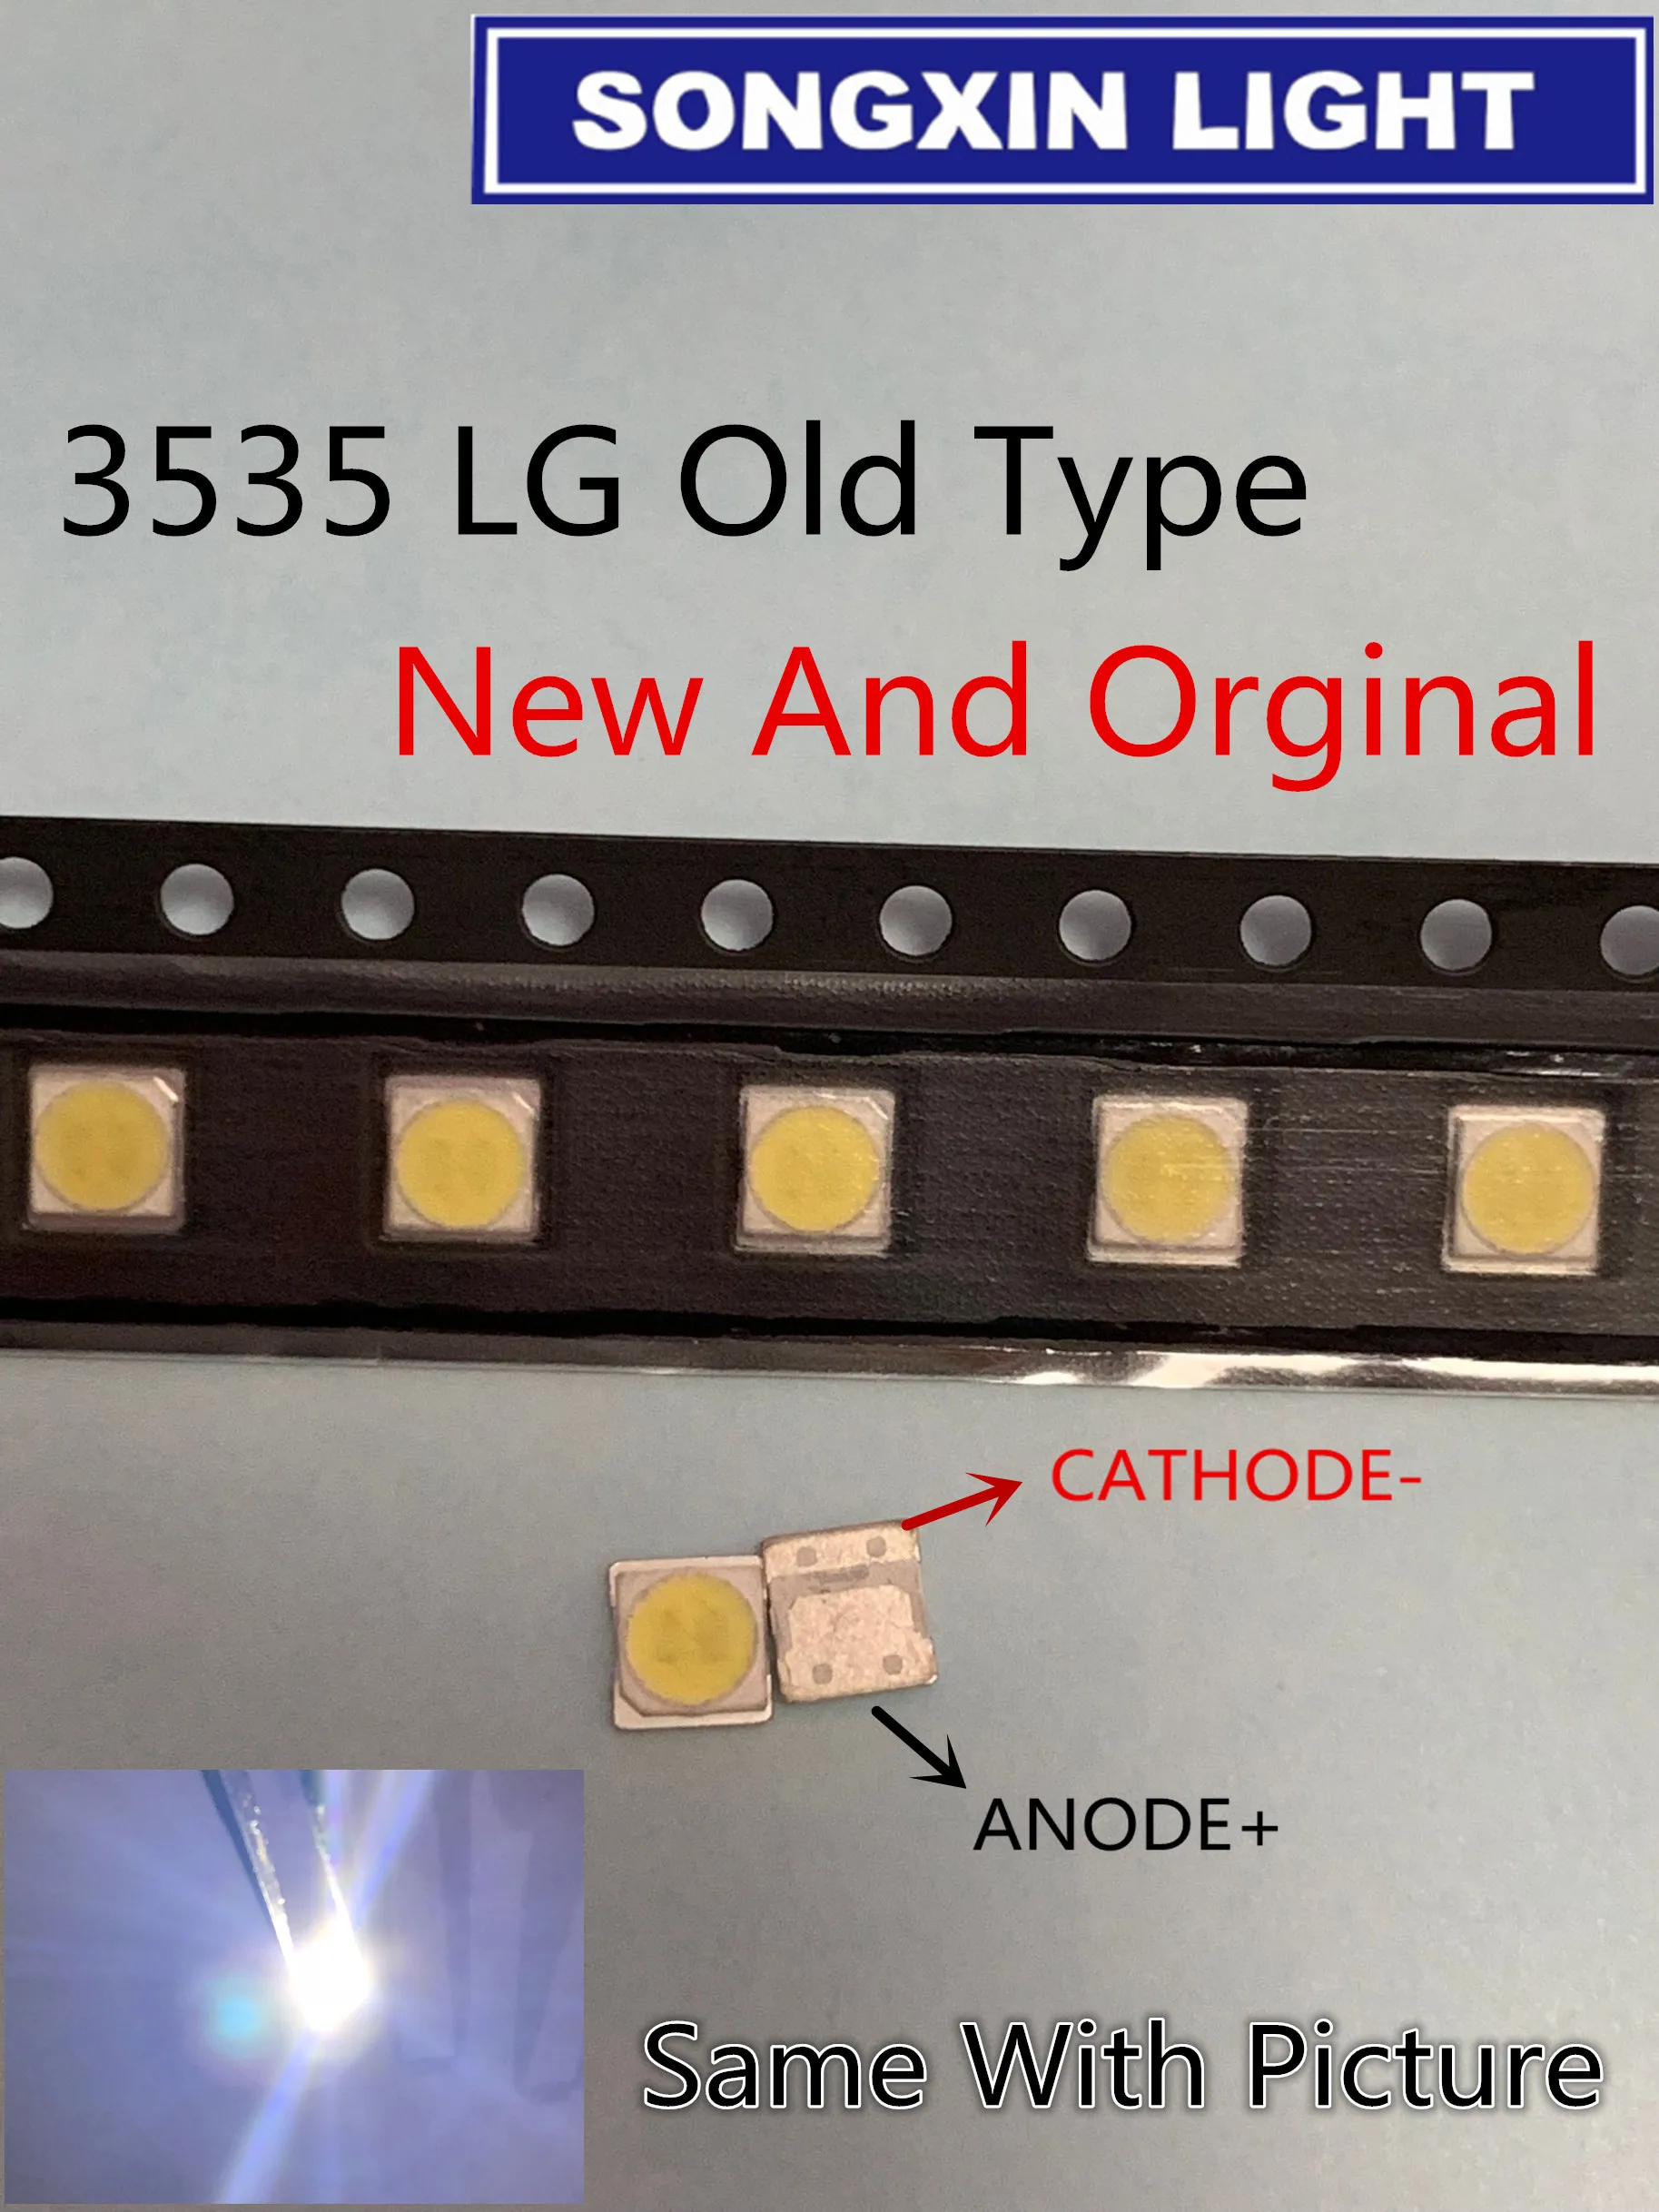 *** LOTS LG LED BACKLIGHT LATWT391RZLZK REF.3535 2 W 6V BLANC FROID *** 